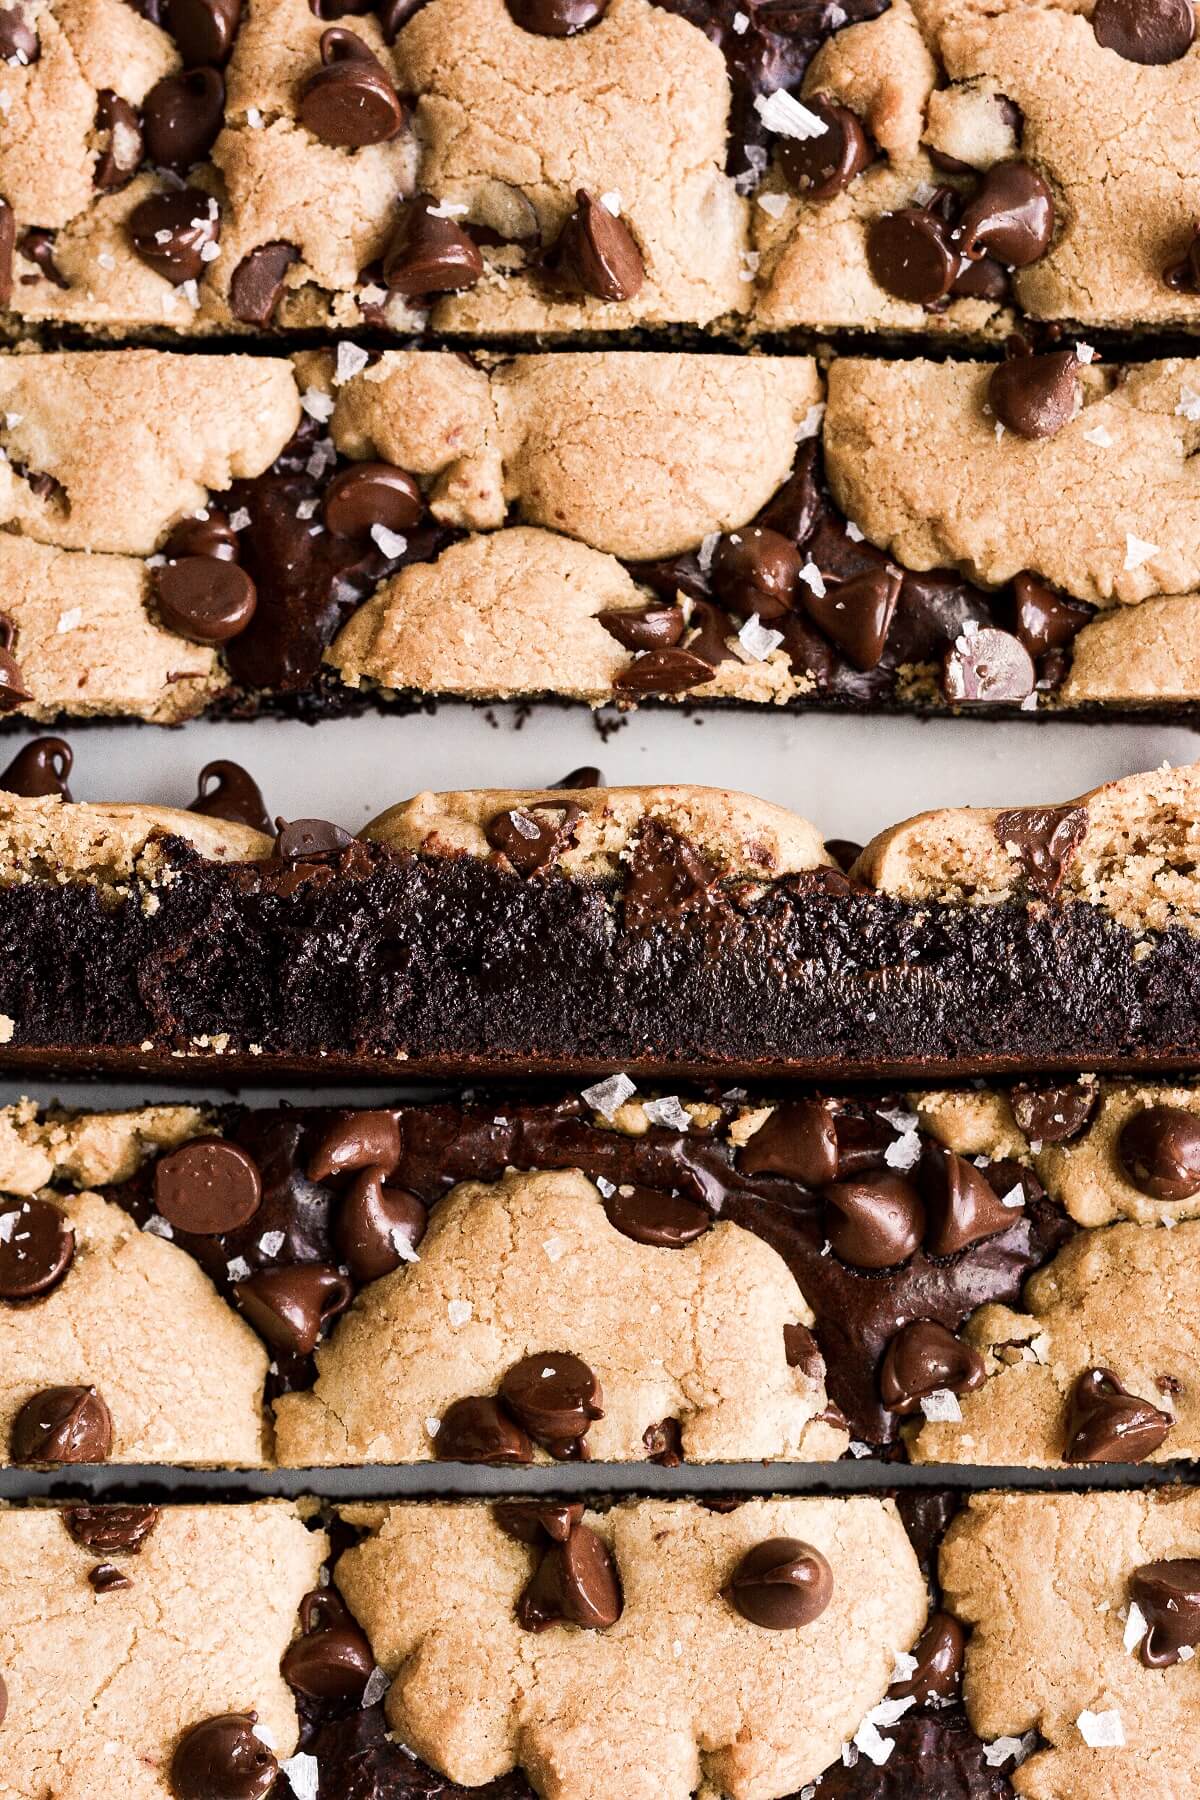 Closeup of chocolate chip cookie brownies cut into bars.